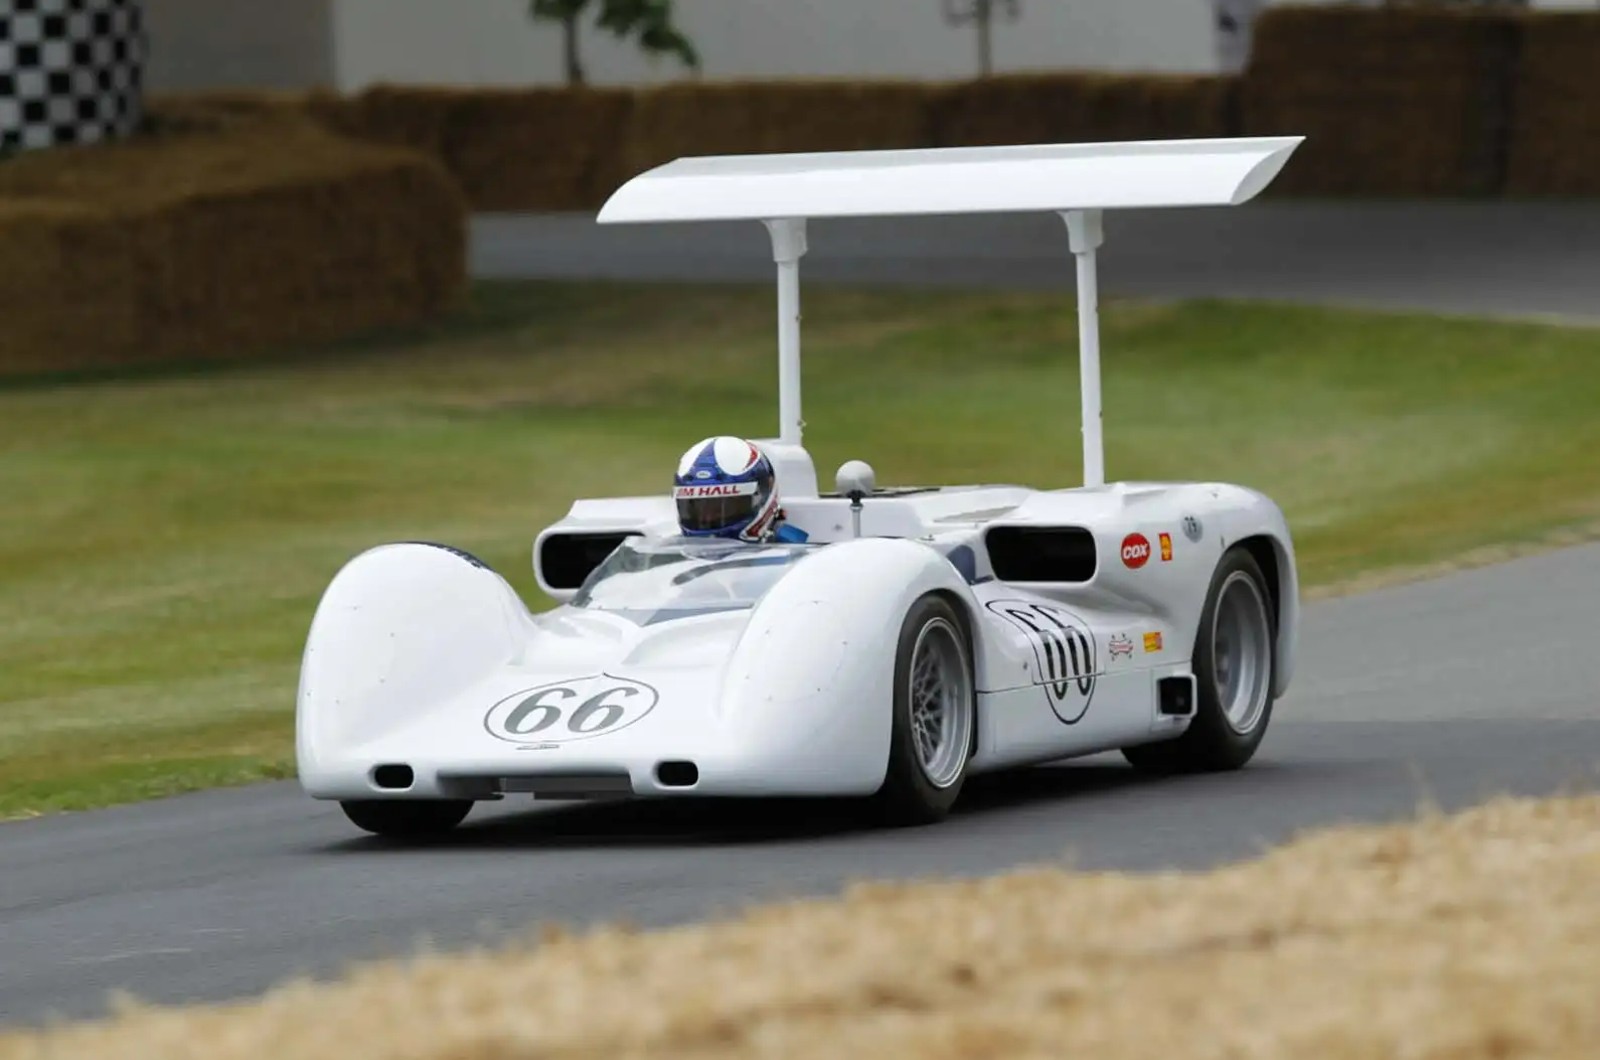 <p>Perhaps the most interesting of the “2” series Chaparral prototypes, the 2E introduced advanced aerodynamic principles to racing in 1966. Its innovative design included an elevated variable-incidence wing that could be adjusted for drag reduction or maximum downforce, providing superior cornering and control.</p><p>Although it achieved only one win at the 1966 Laguna Seca Raceway Can-Am, its performance was deceptive, as it led in several races. However, the 2E’s contributions extend far beyond any success in racing, as its pioneering aerodynamic design and heavy focus on generating downforce has hugely influenced subsequent race car design.</p>